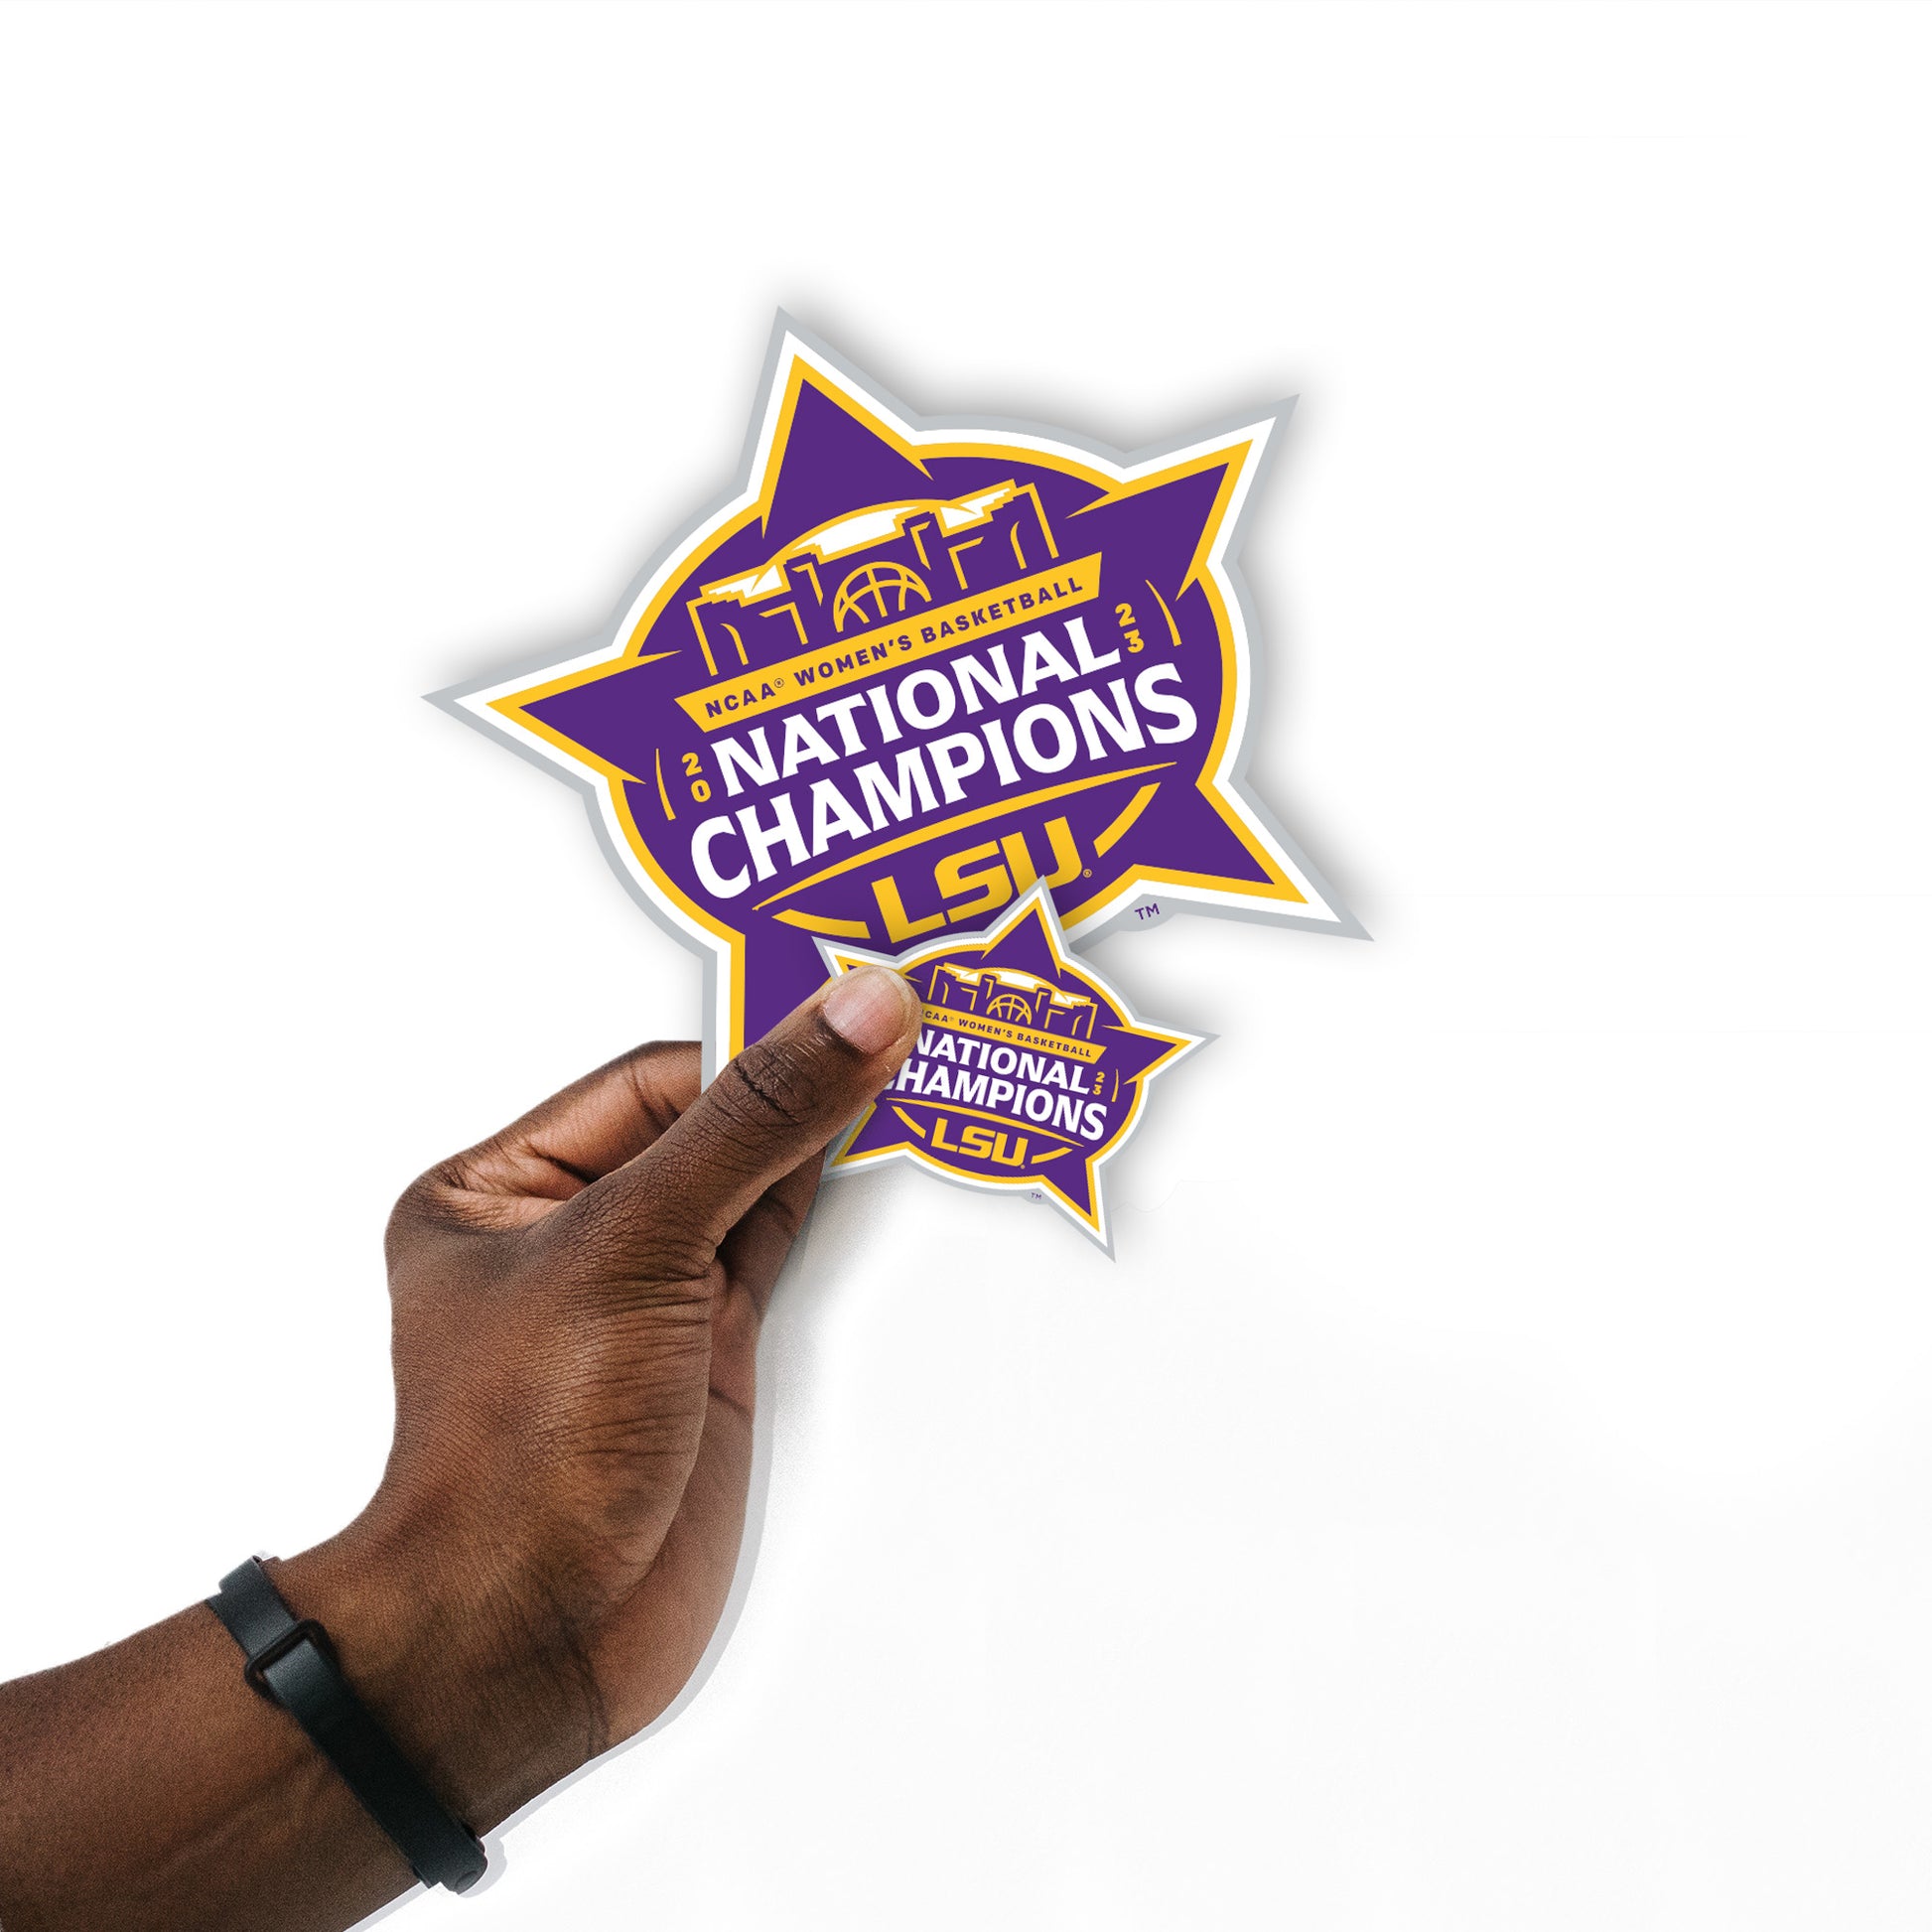 LSU Tigers: 2023 Women's Basketball Champions Logo - Officially